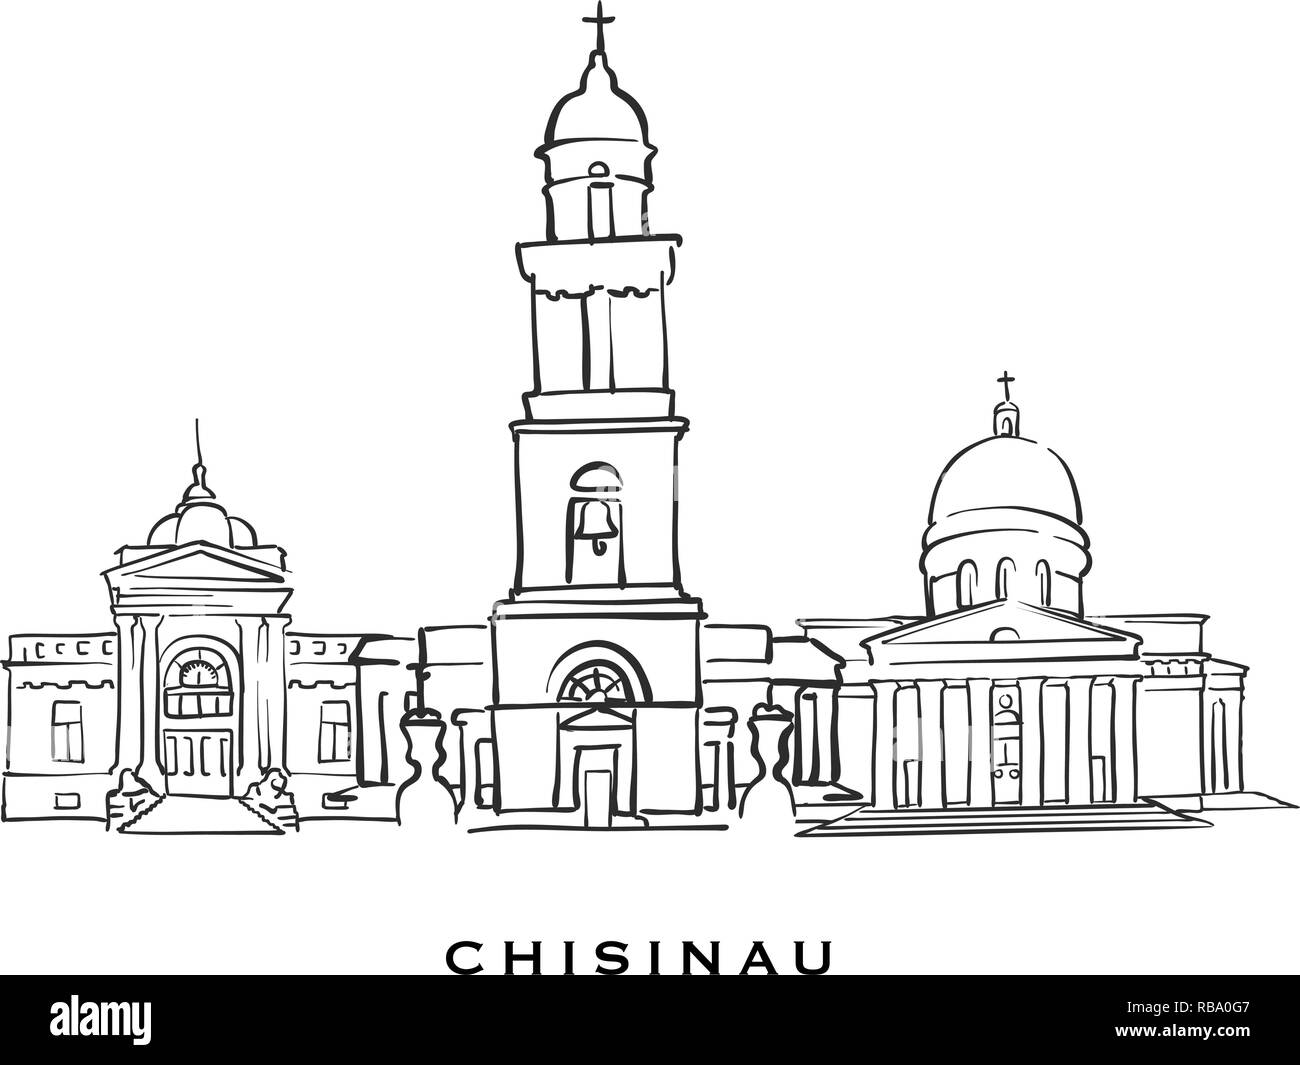 Chisinau Moldova famous architecture. Outlined vector sketch separated on white background. Architecture drawings of all European capitals. Stock Vector